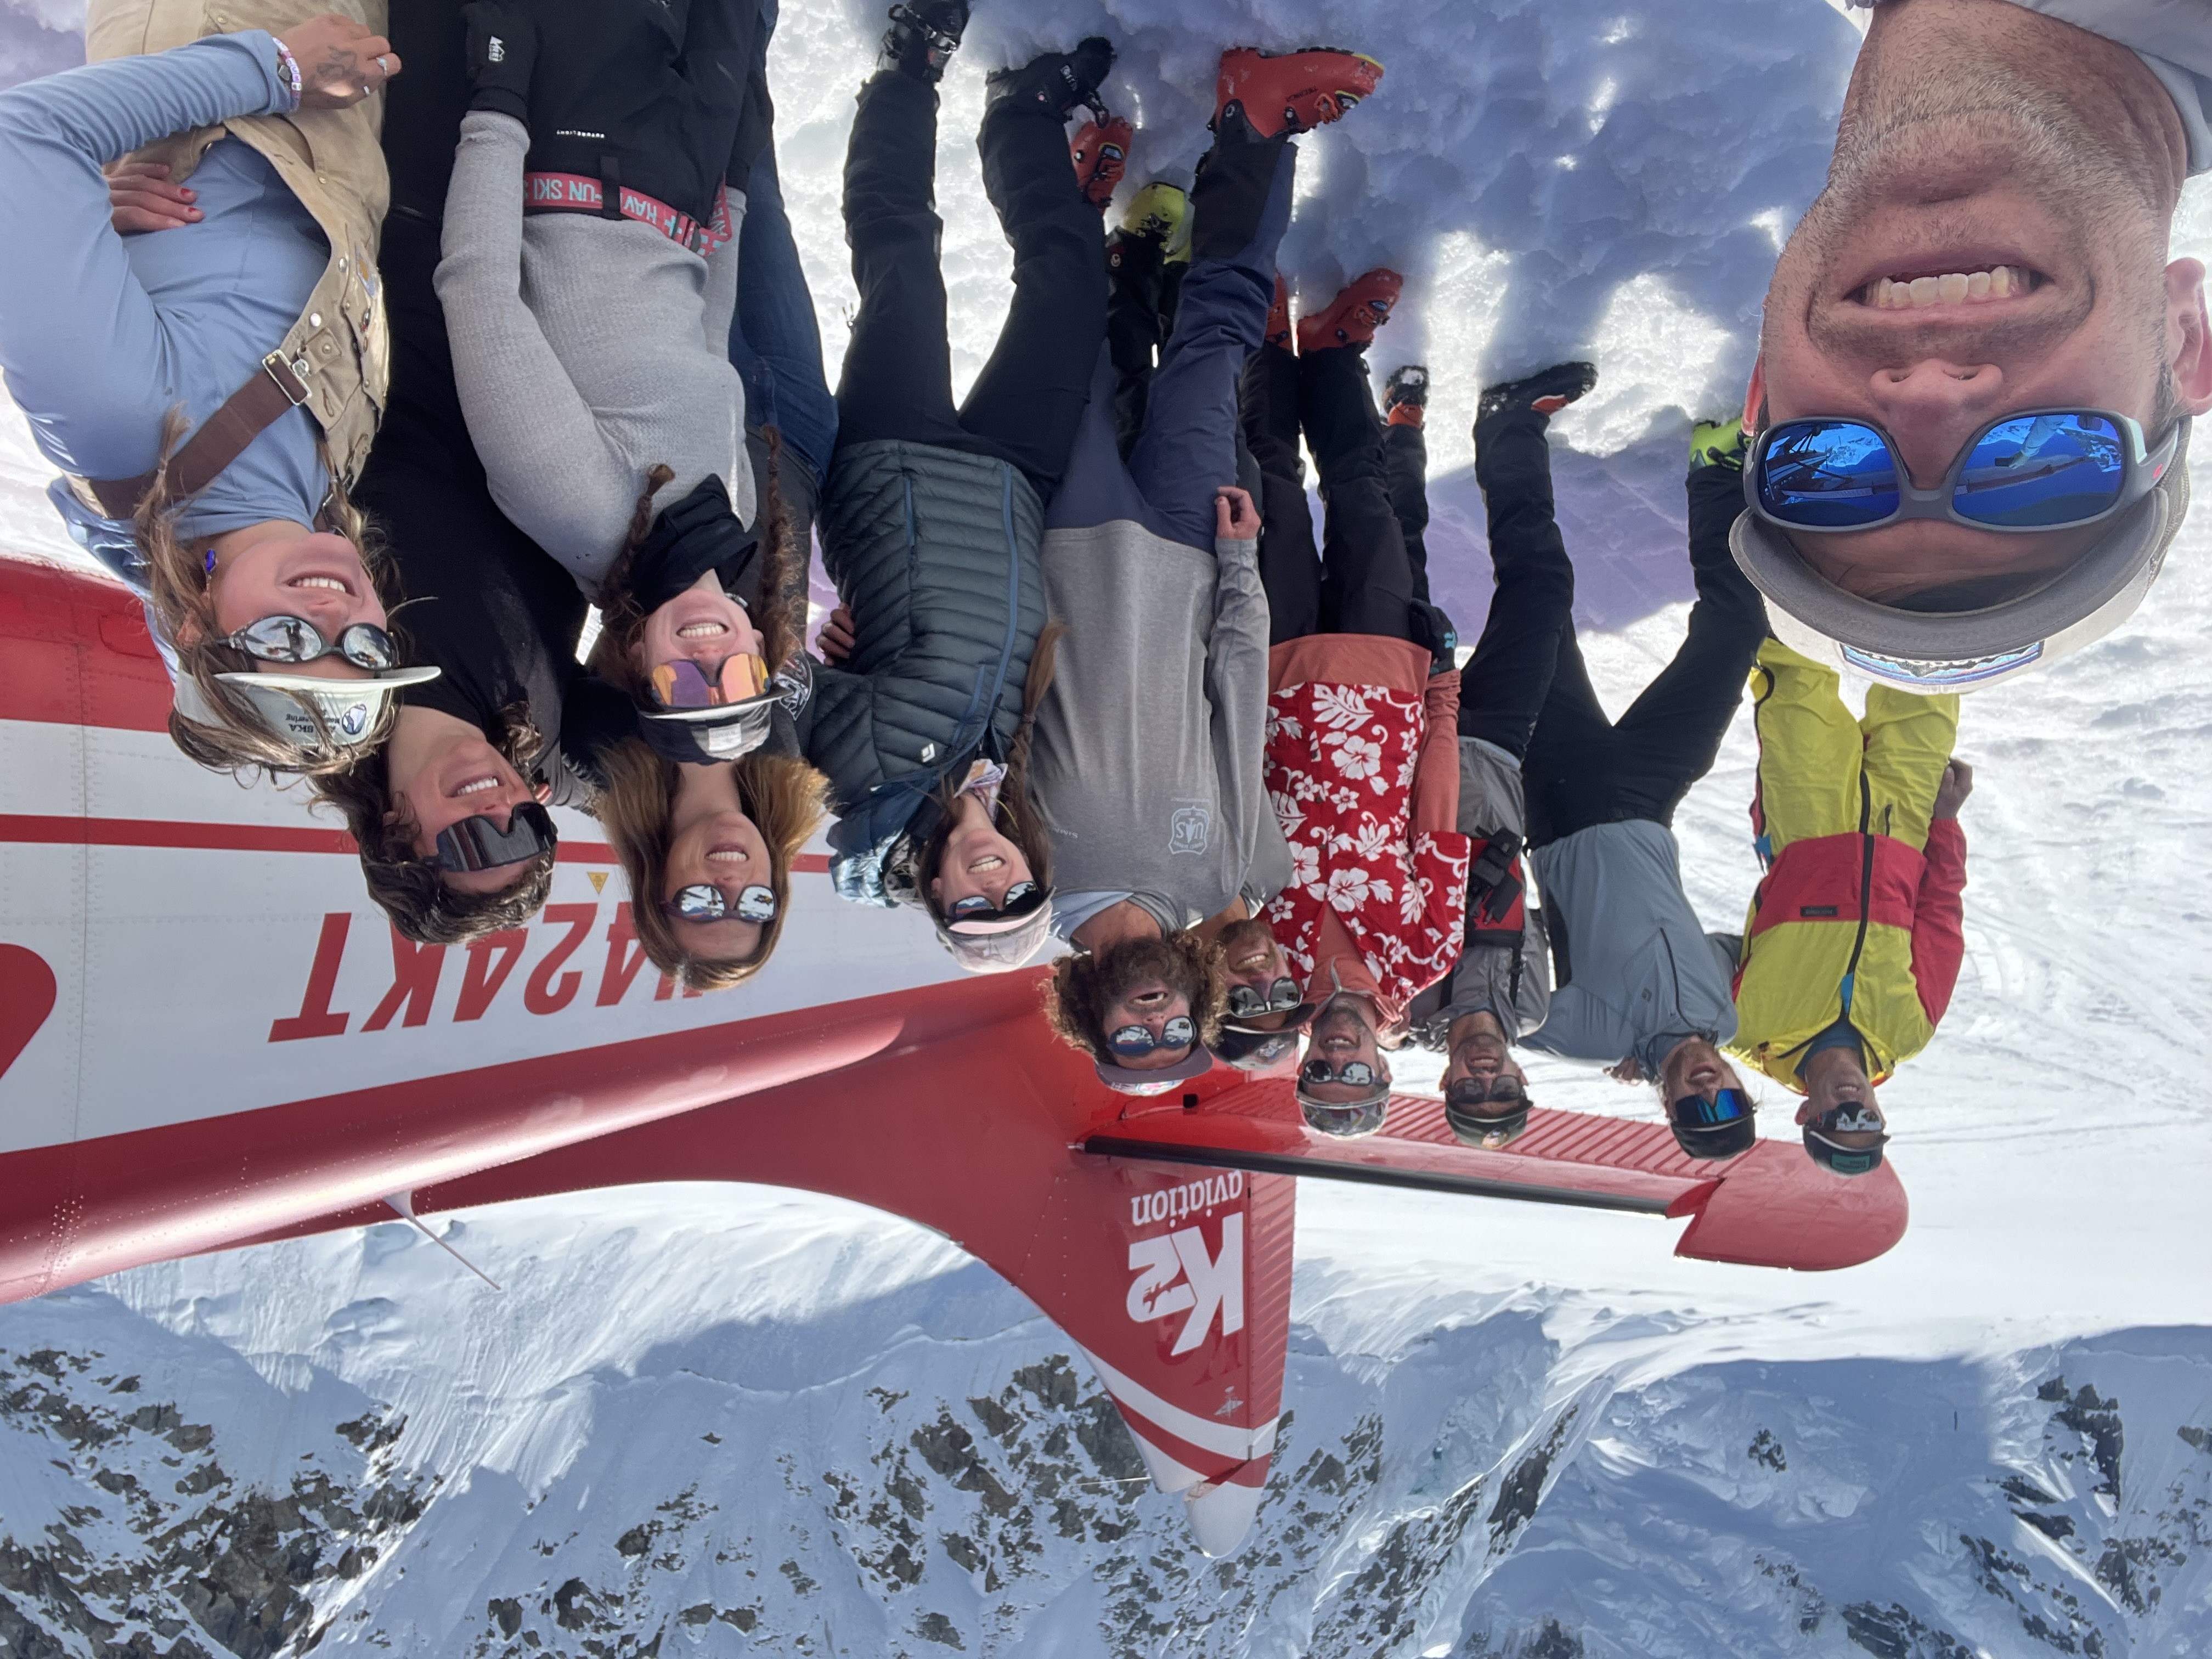 Twelve climbers pose for a photo near the tail of a red and white airplane